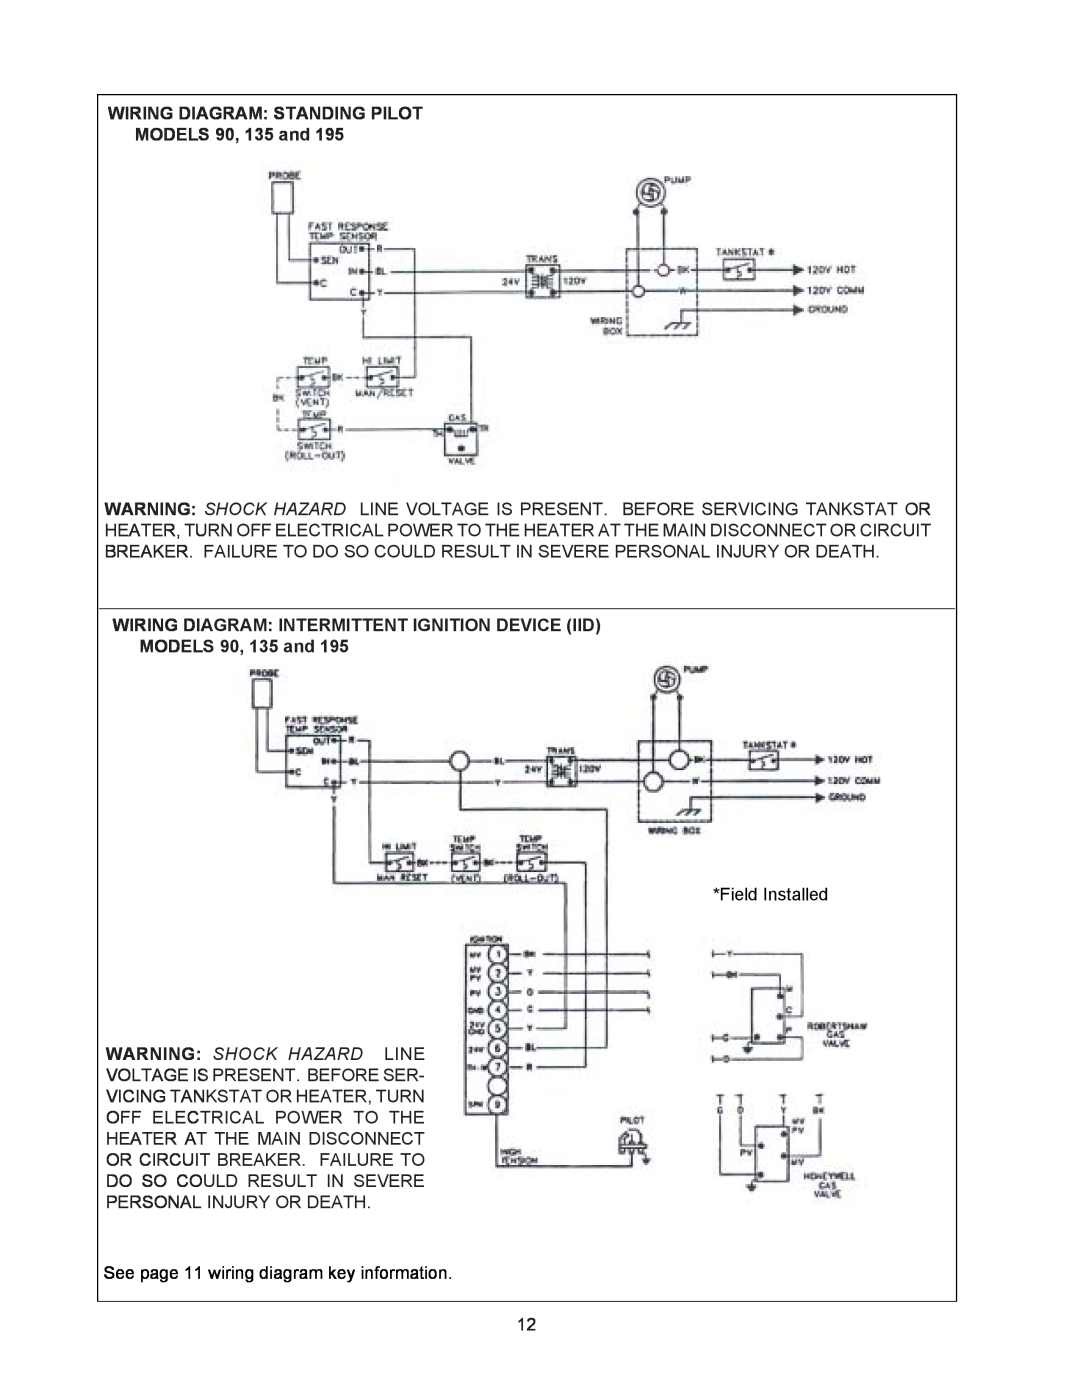 Raypak 195A, 135A, 090A WIRING DIAGRAM STANDING PILOT MODELS 90, 135 and, Wiring Diagram Intermittent Ignition Device Iid 